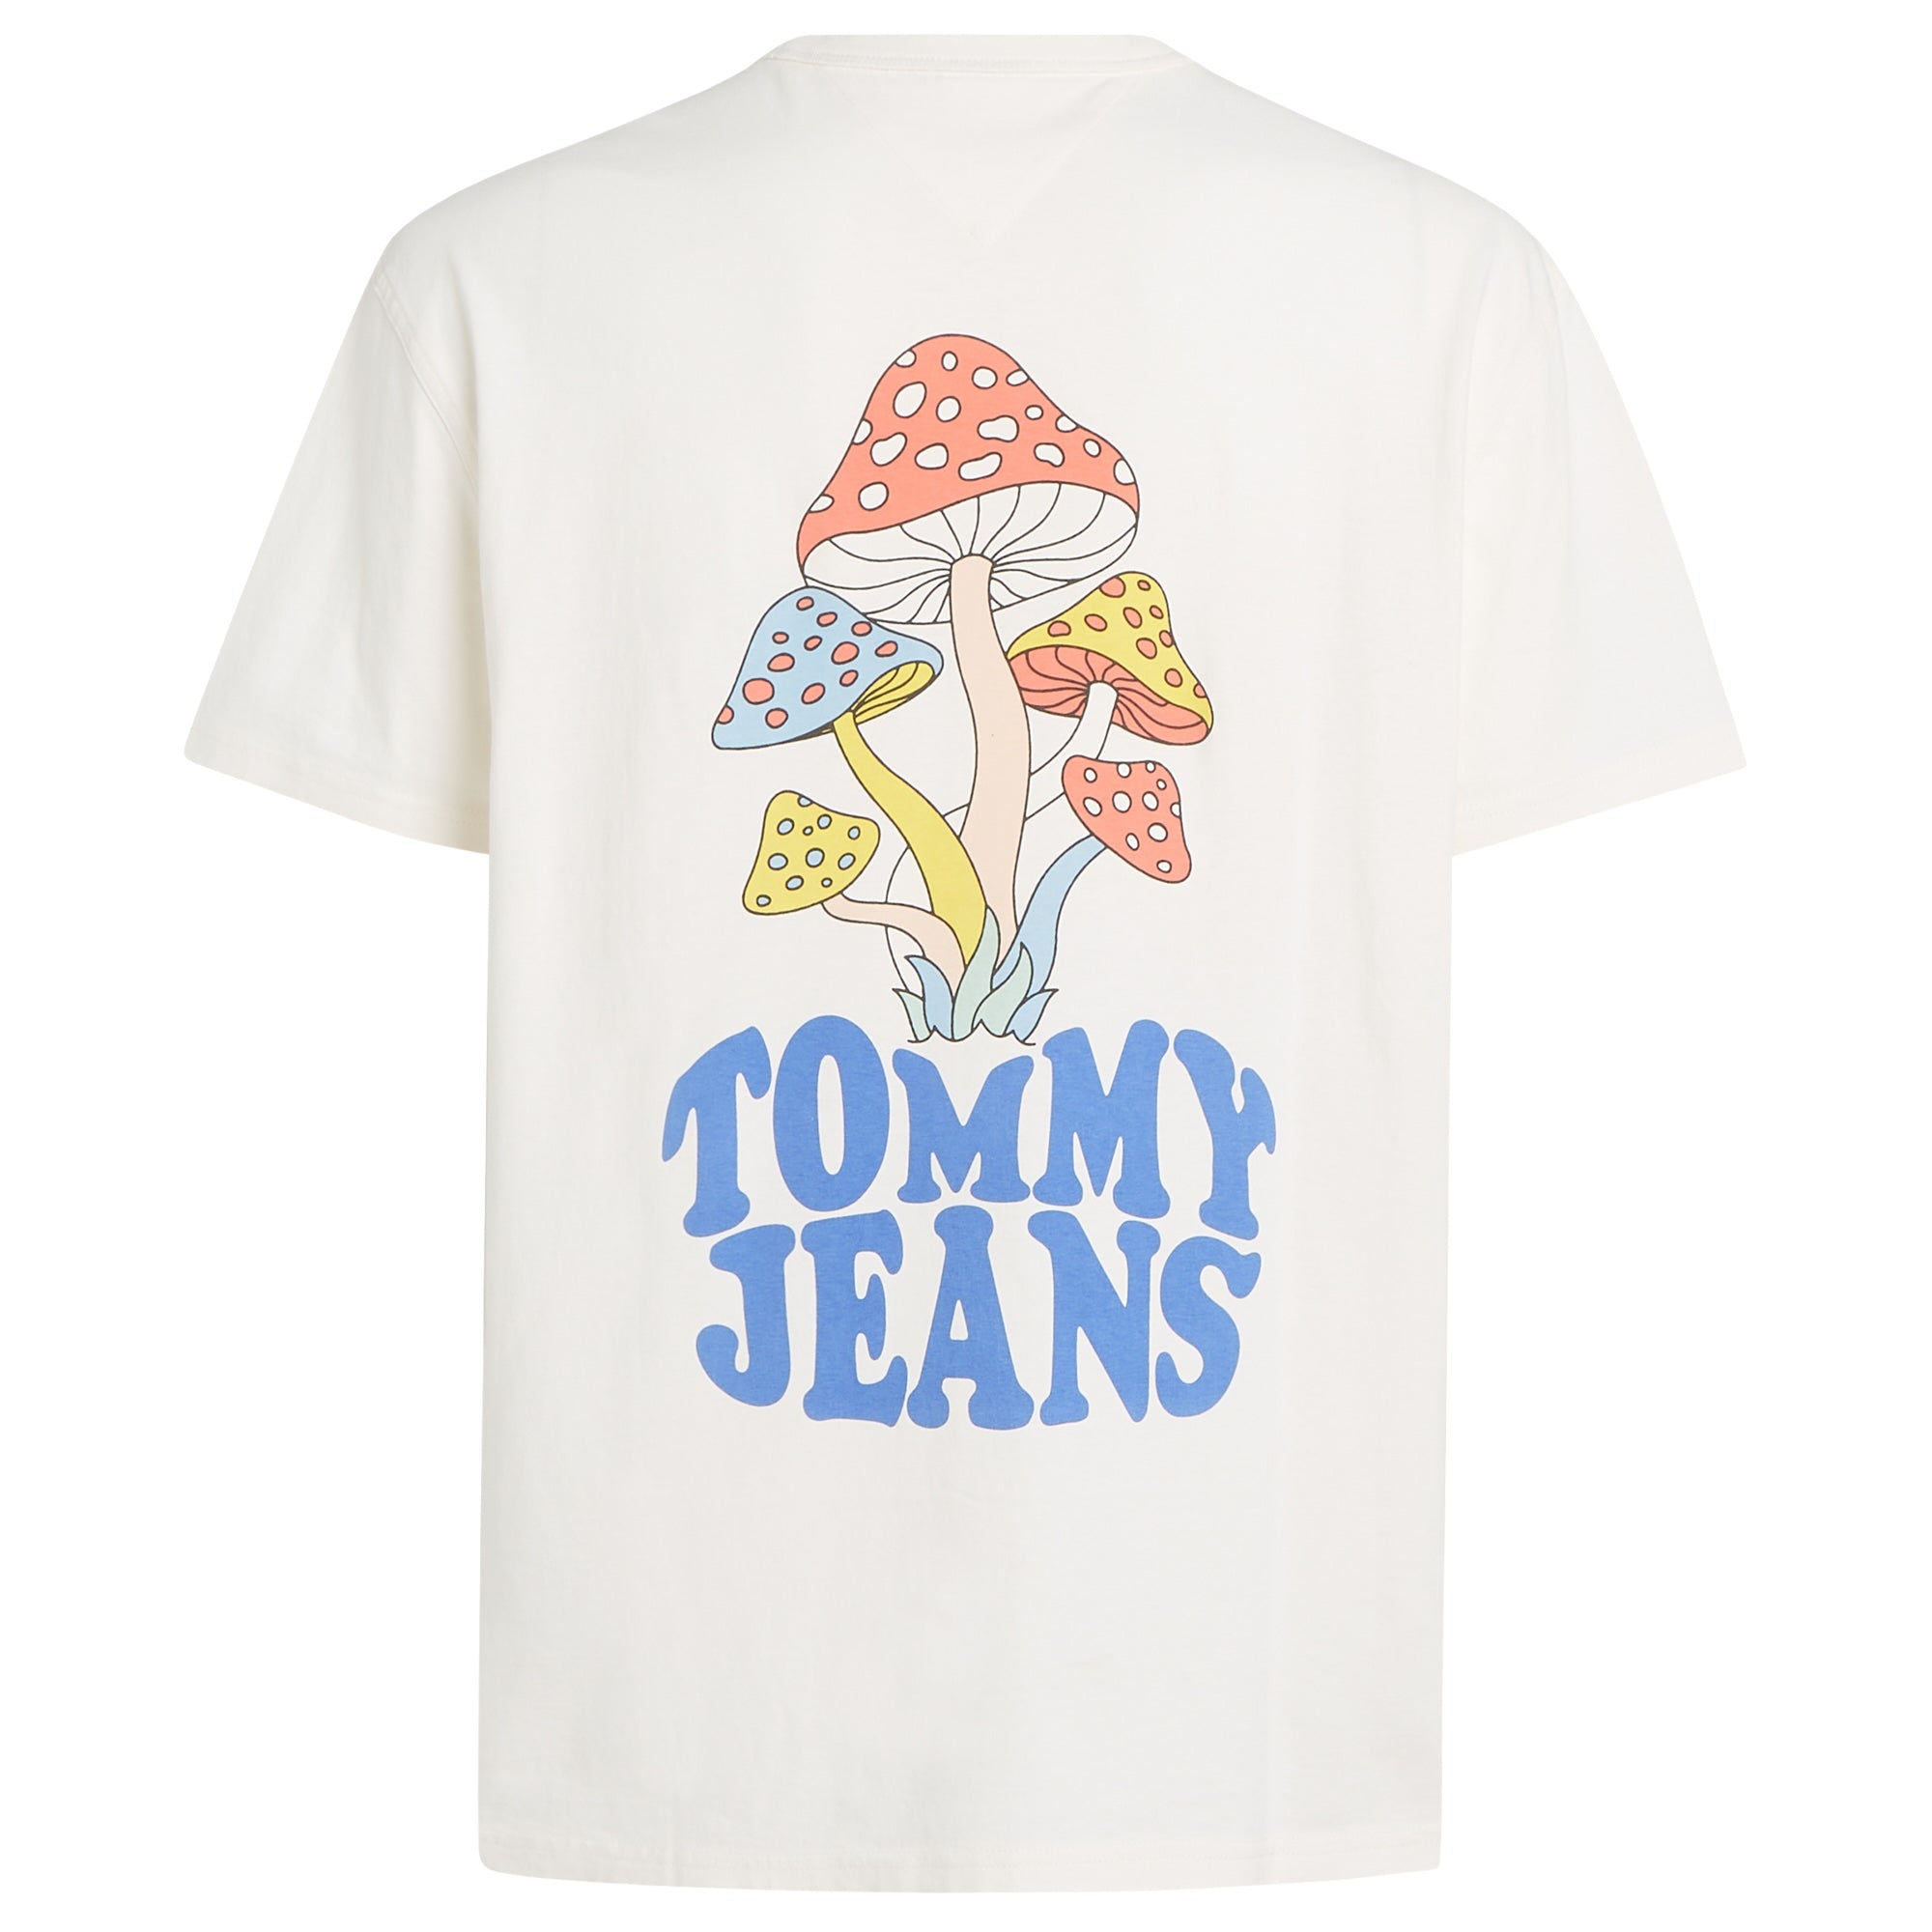 Tommy Jeans Mushrooms Graphic T-Shirt - Ancient White